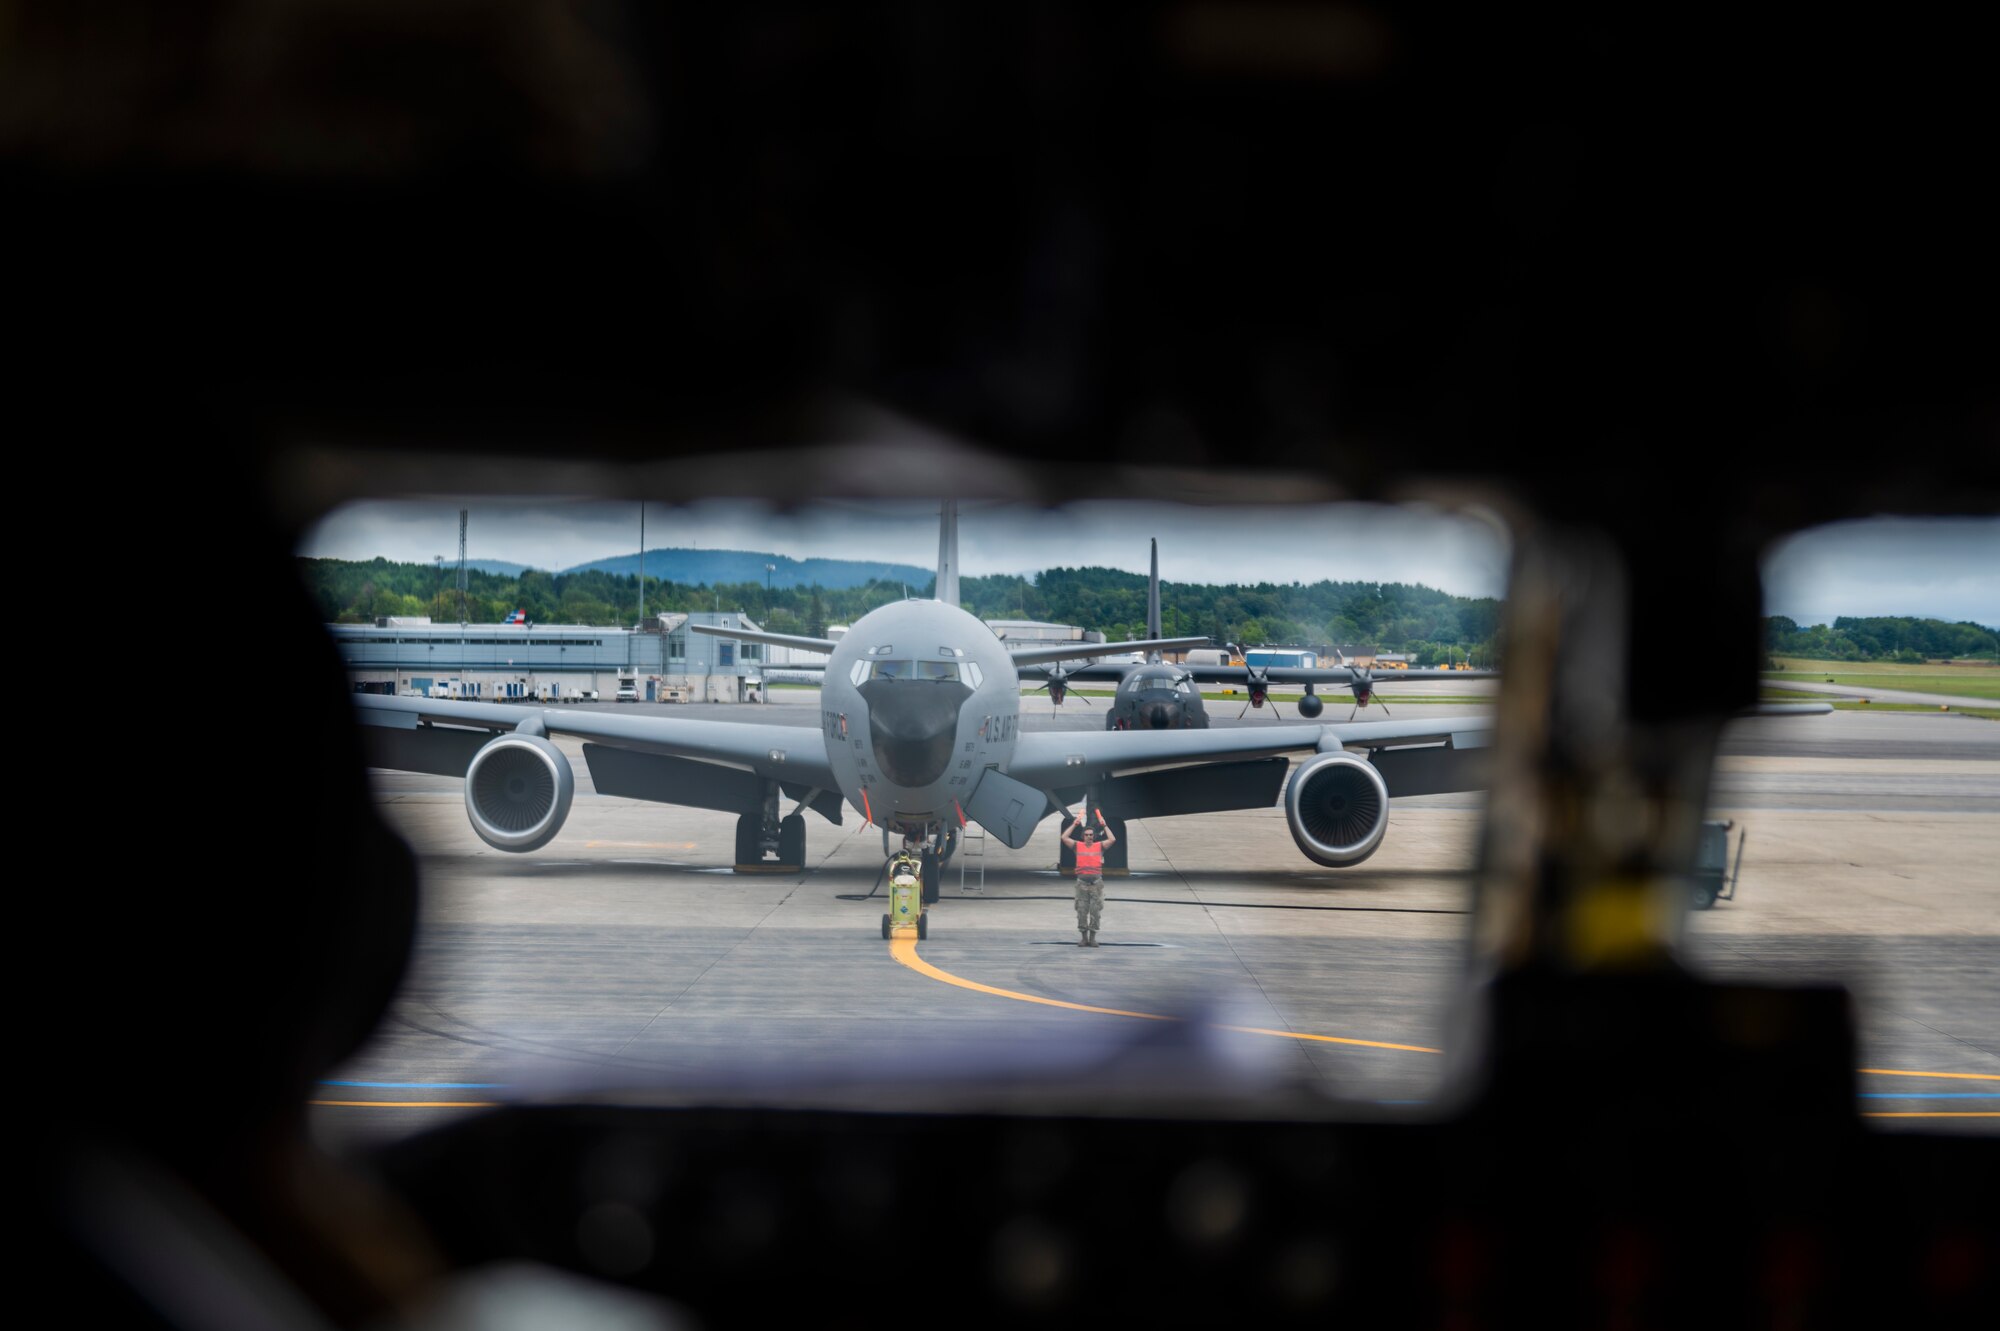 A maintenance Airmen assigned to the 6th Aircraft Maintenance Squadron marshals a KC-135 Stratotanker assigned to the 91st Air Refueling Squadron before taking-off at Bangor Air National Guard Base, Maine, Aug. 24, 2022.